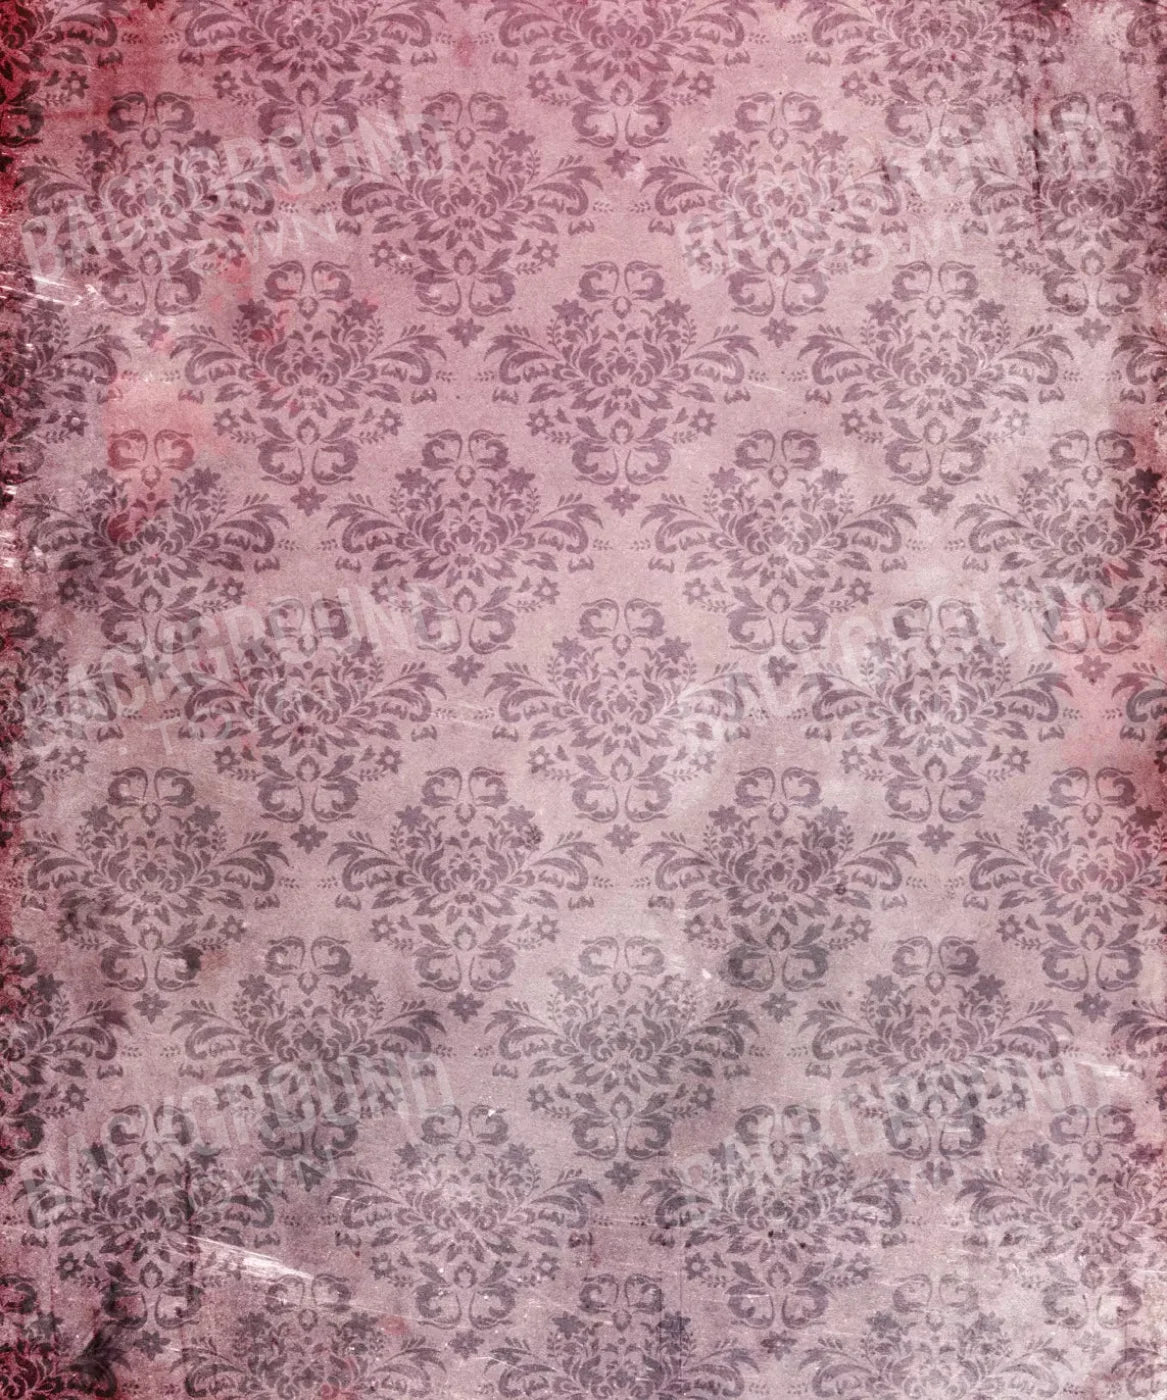 Pink Damask Backdrop for Photography